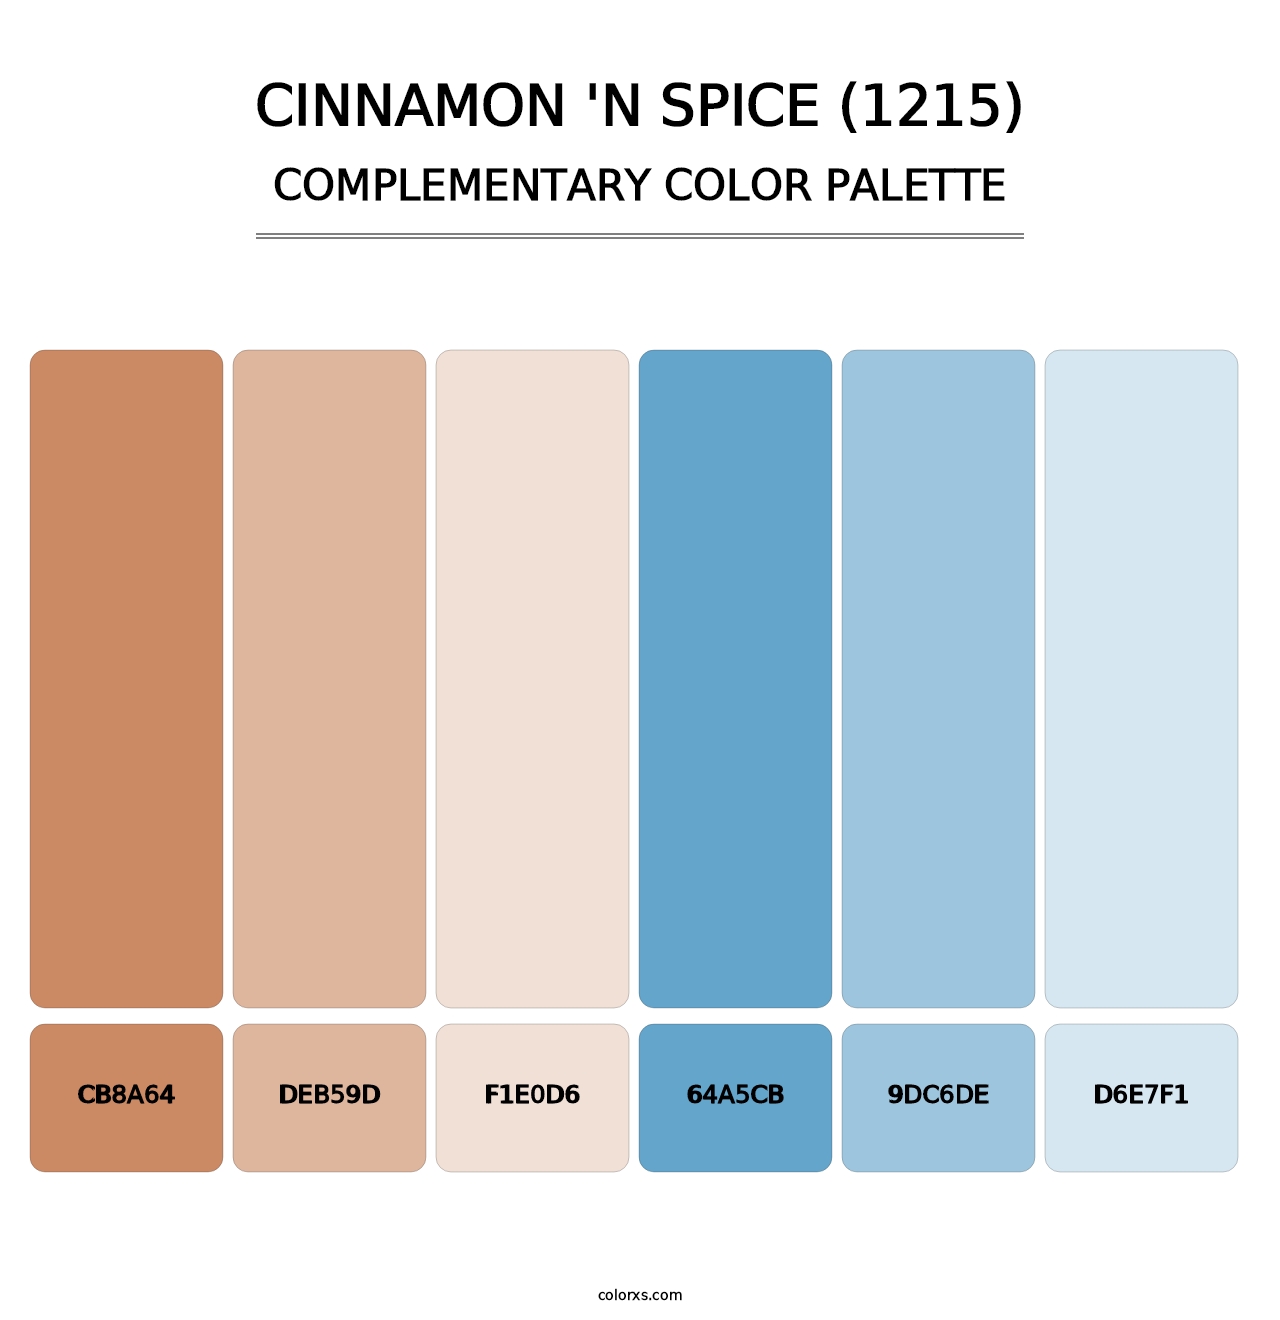 Cinnamon 'n Spice (1215) - Complementary Color Palette